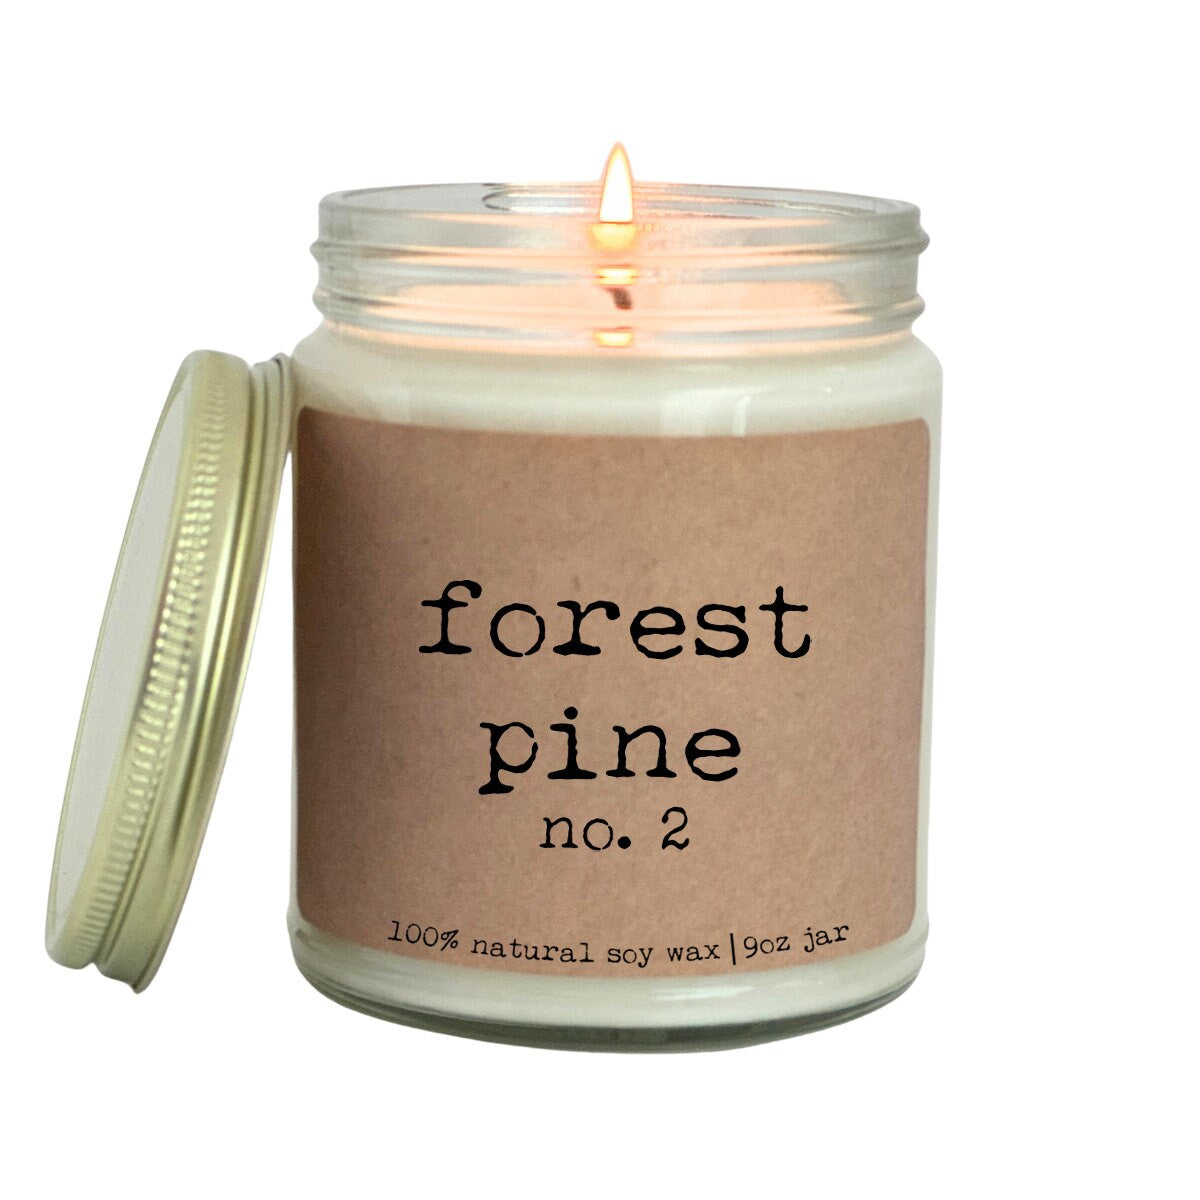 a candle with a label that says forest pine no 2